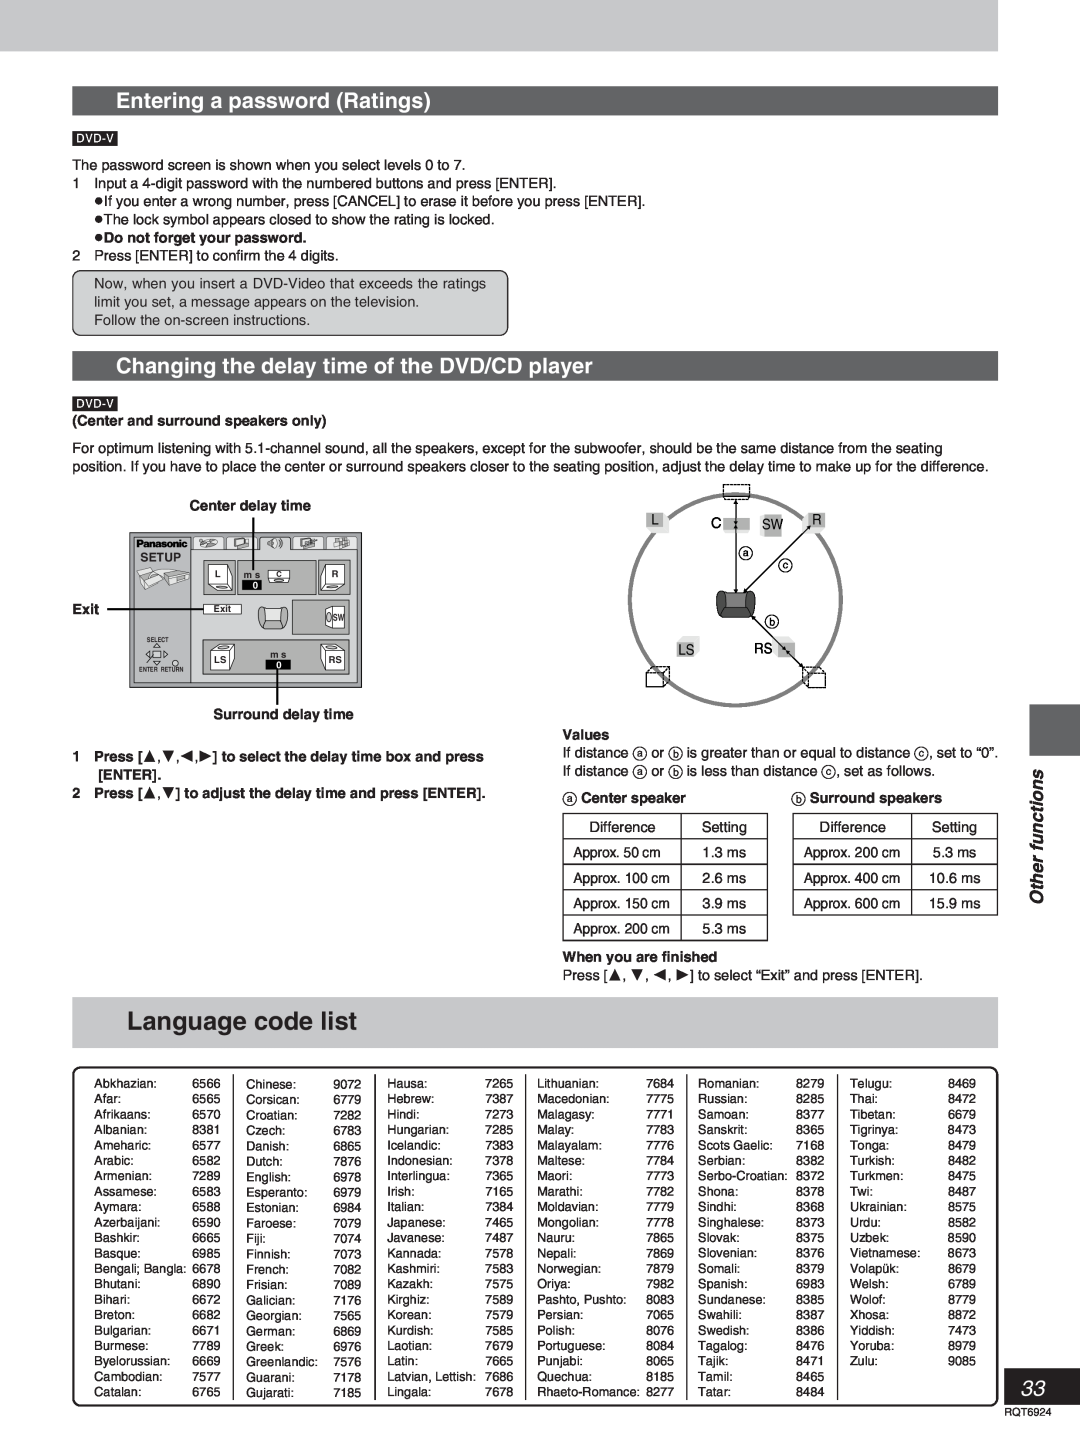 Panasonic SC-DT310 manual Language code list, Entering a password Ratings, Changing the delay time of the DVD/CD player 